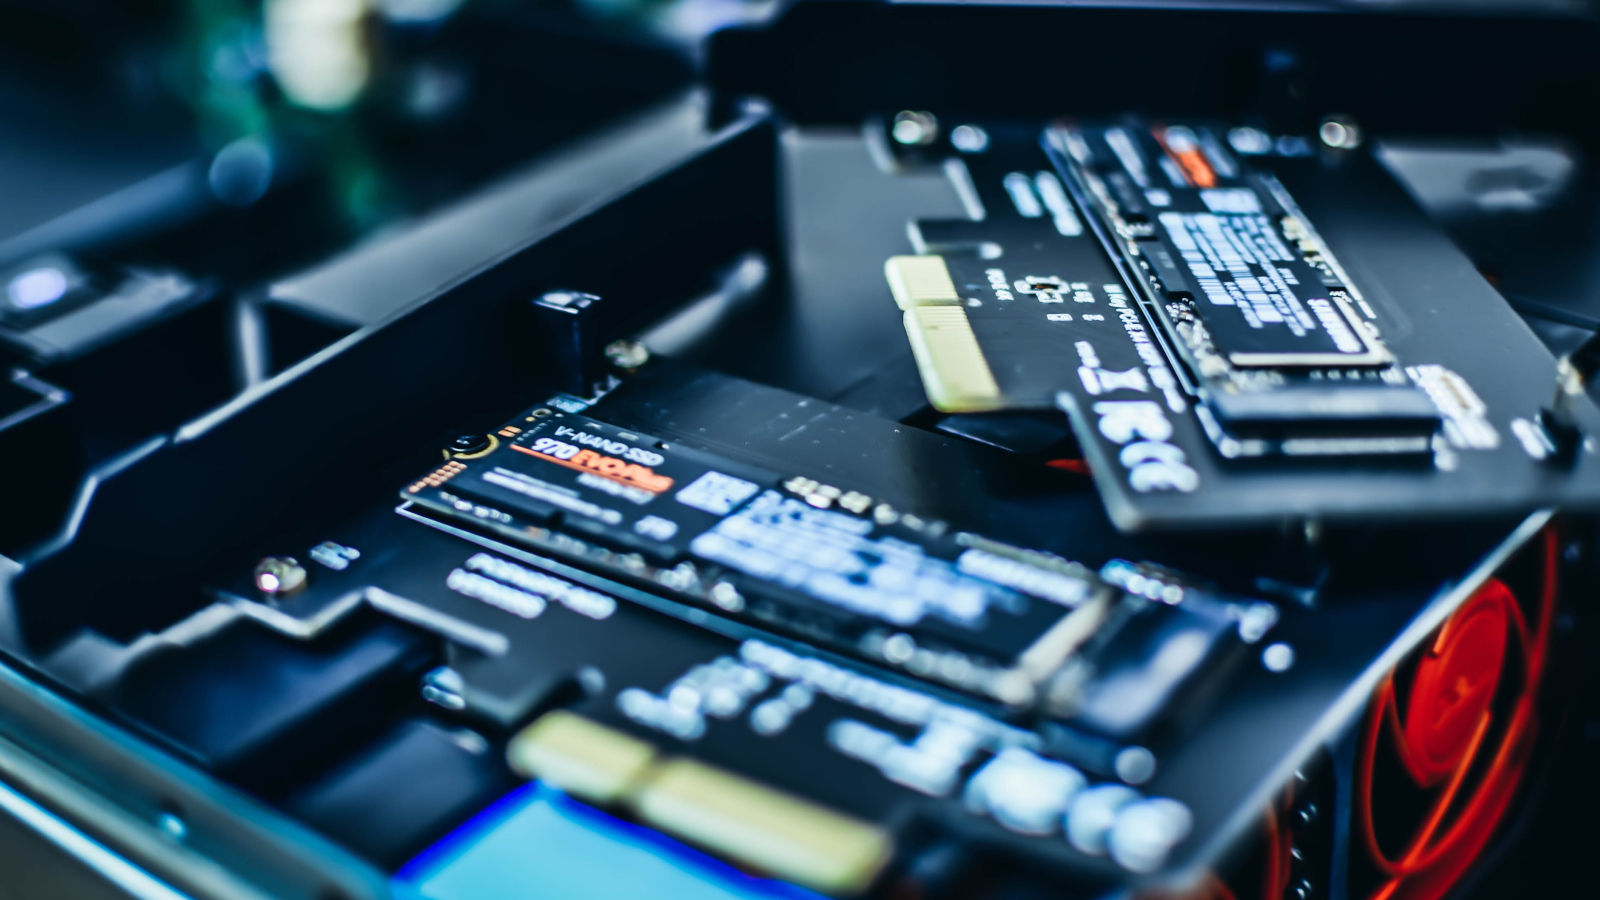 Regularly poison Serious Firmware attack can drop persistent malware in hidden SSD area